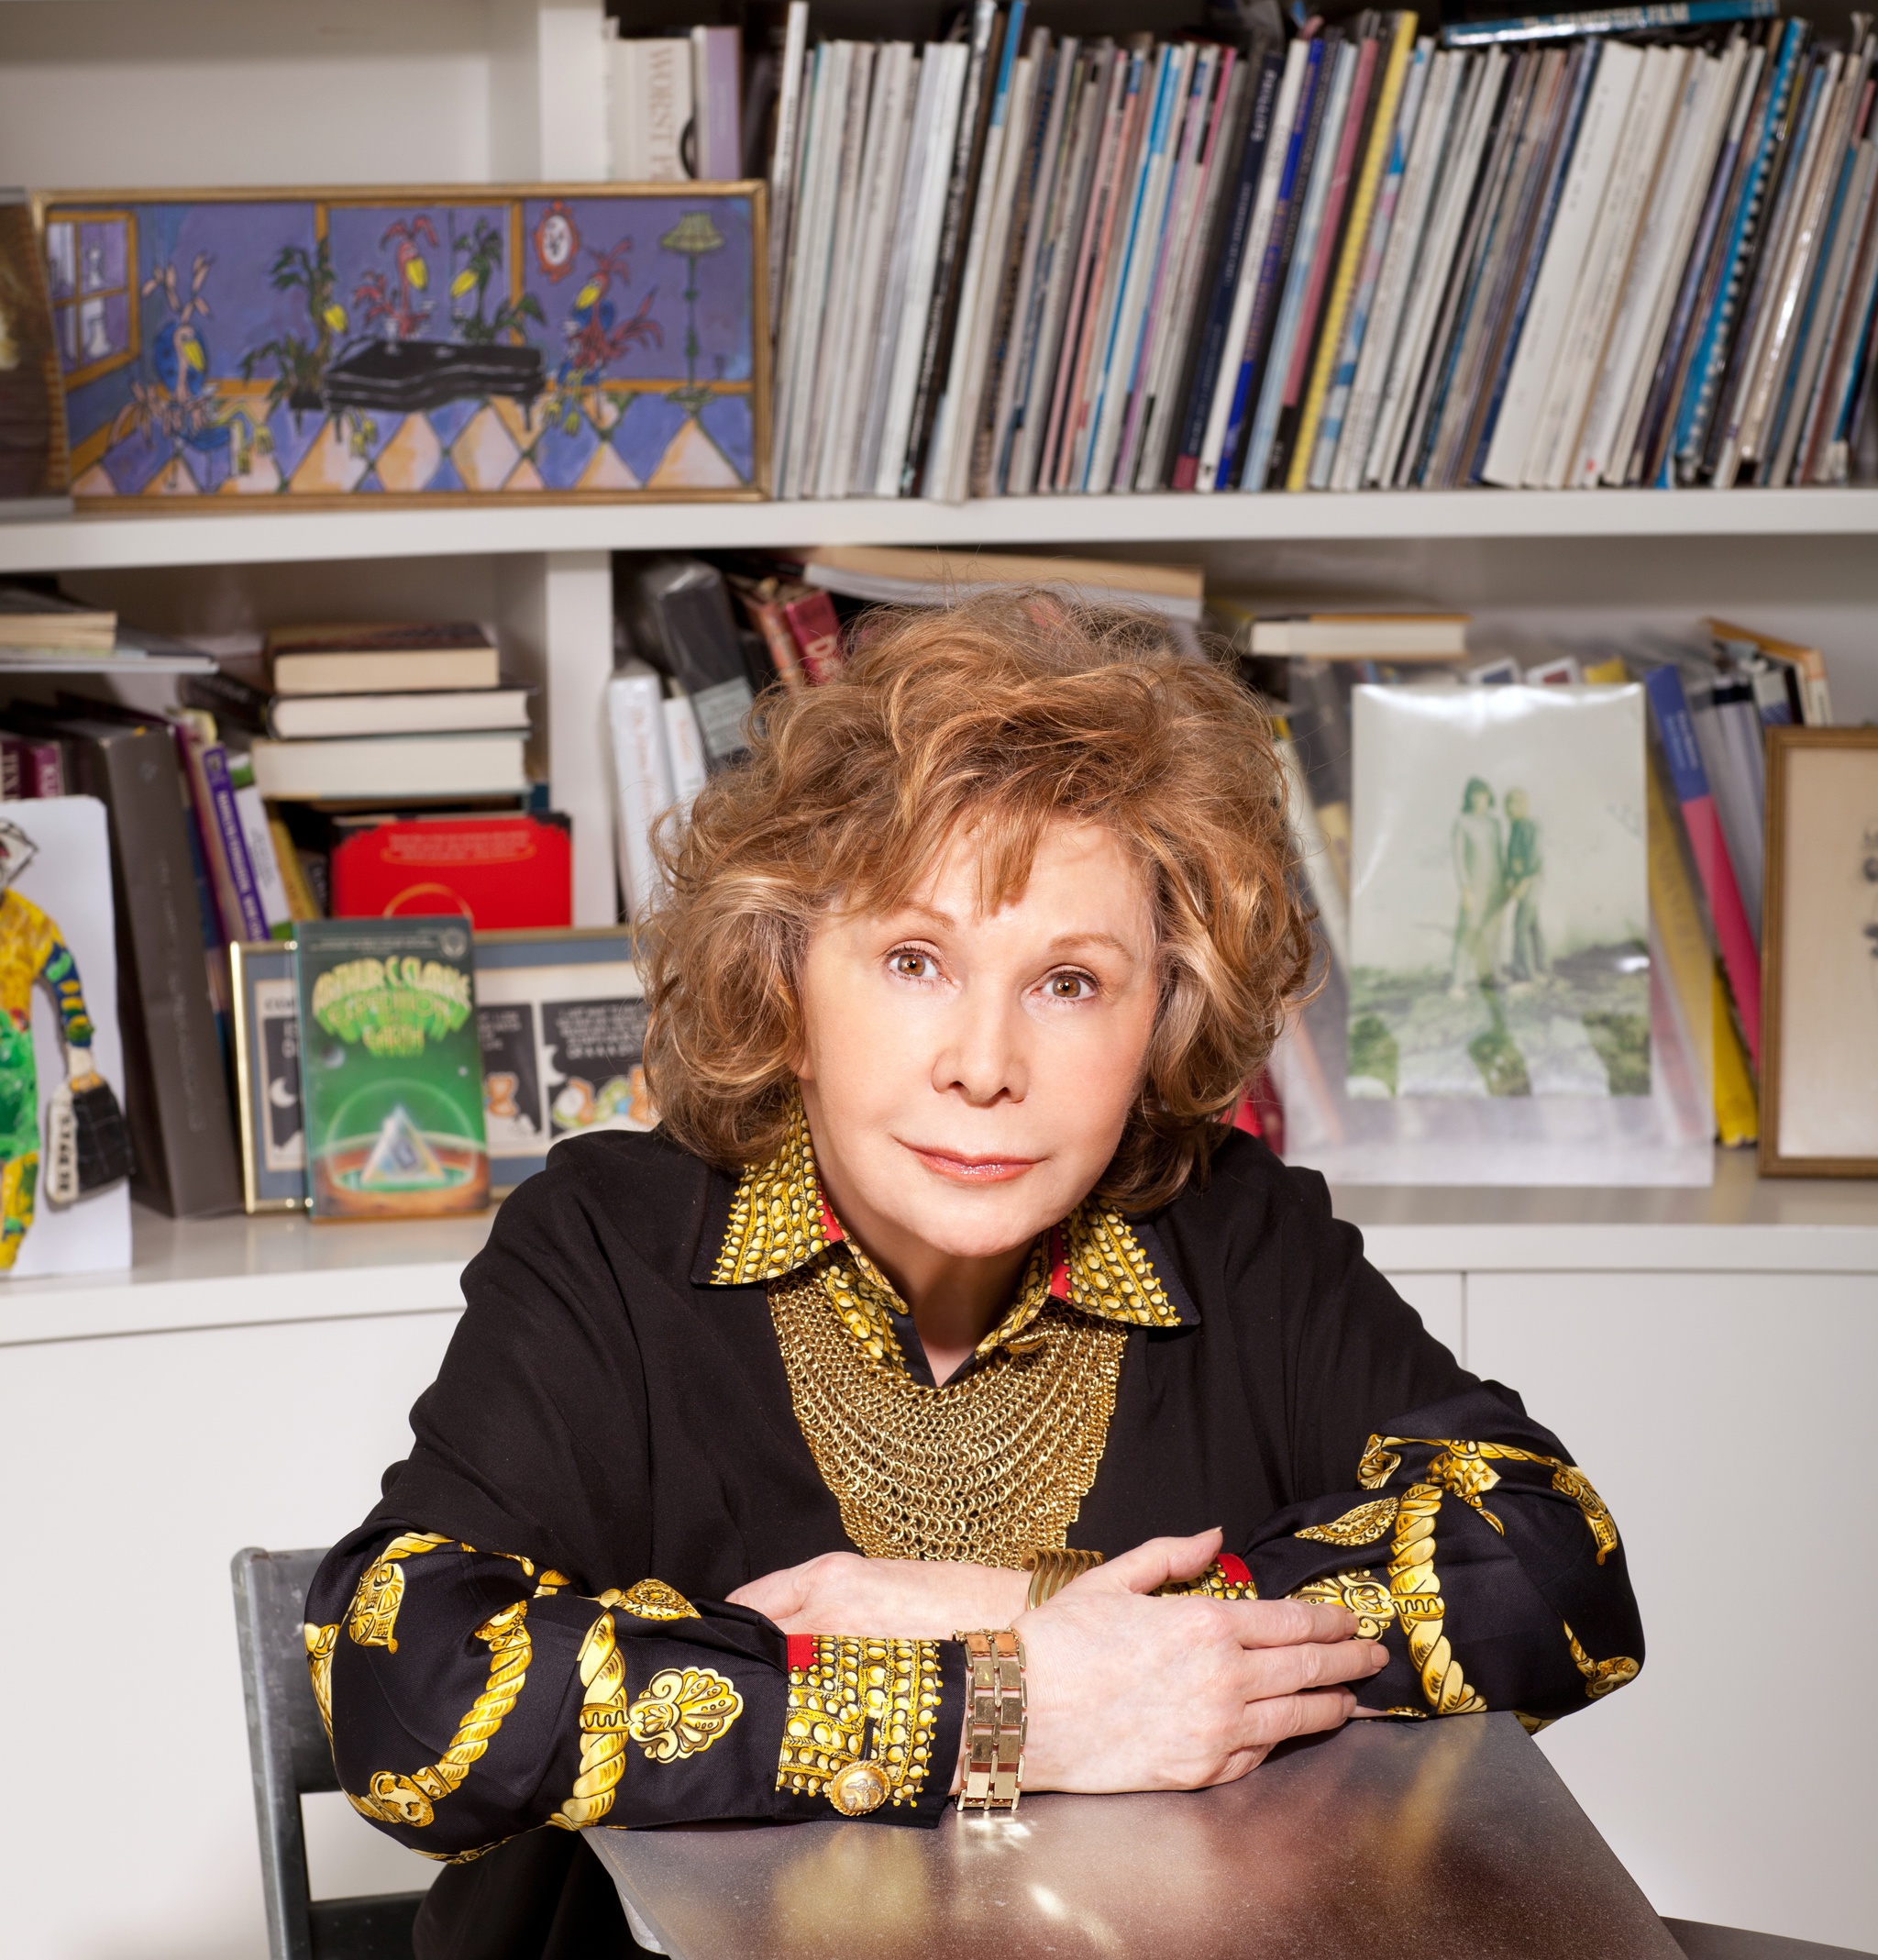 The writer Jane Wagner, a white woman with auburn hair, sitting at a table with hands crossed in front of her, with a shelf full of books and other objects behind her. 